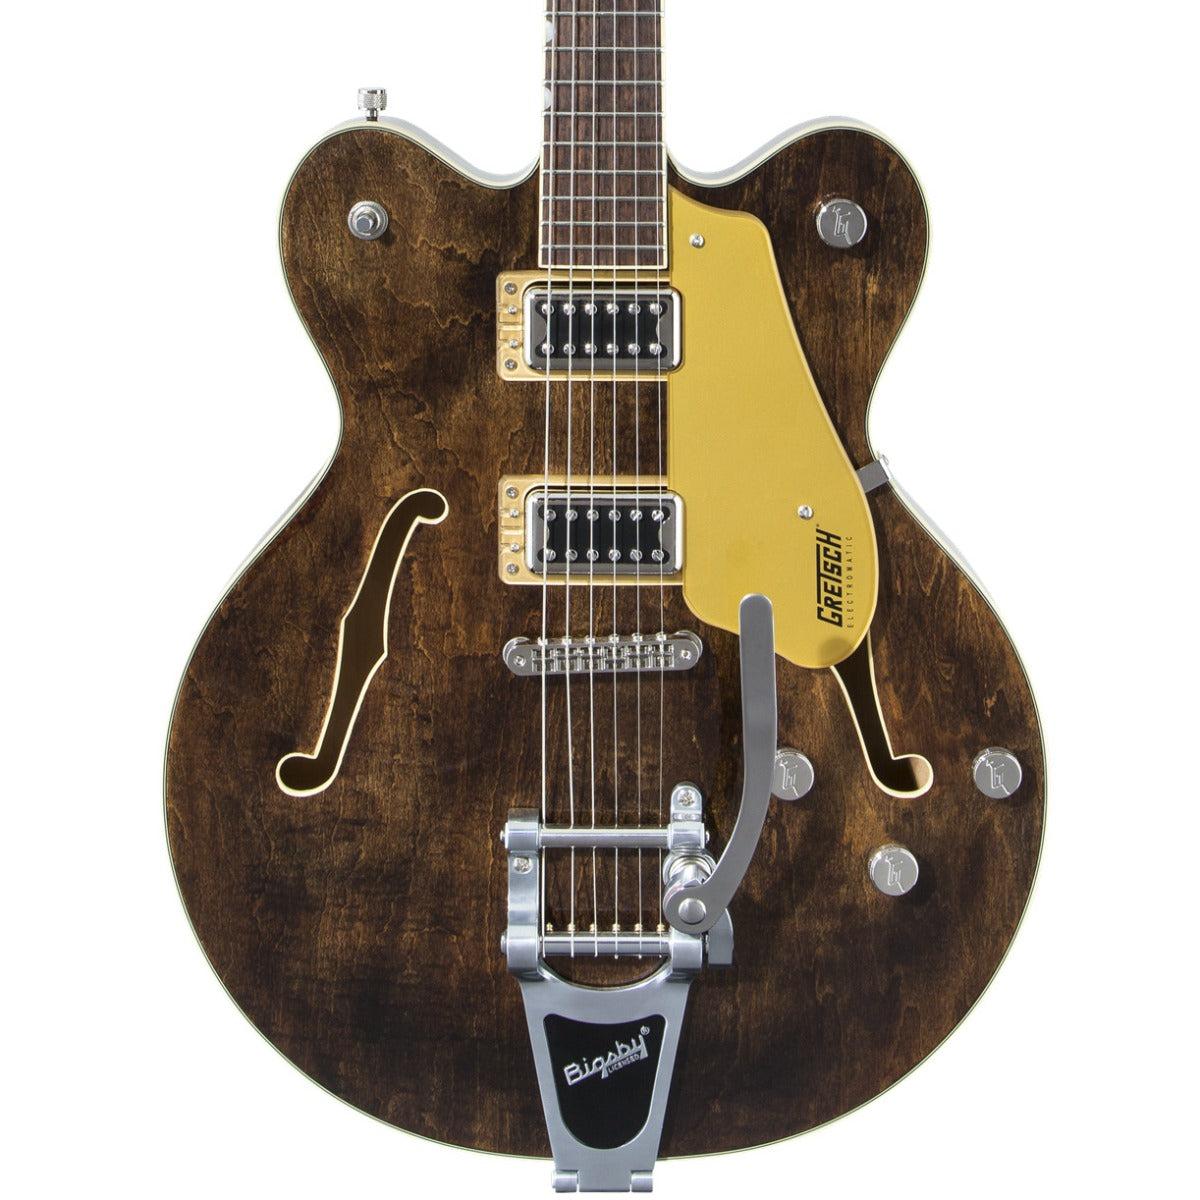 Image of Gretsch G5622T Electromatic Center Block Guitar - Imperial Stain body